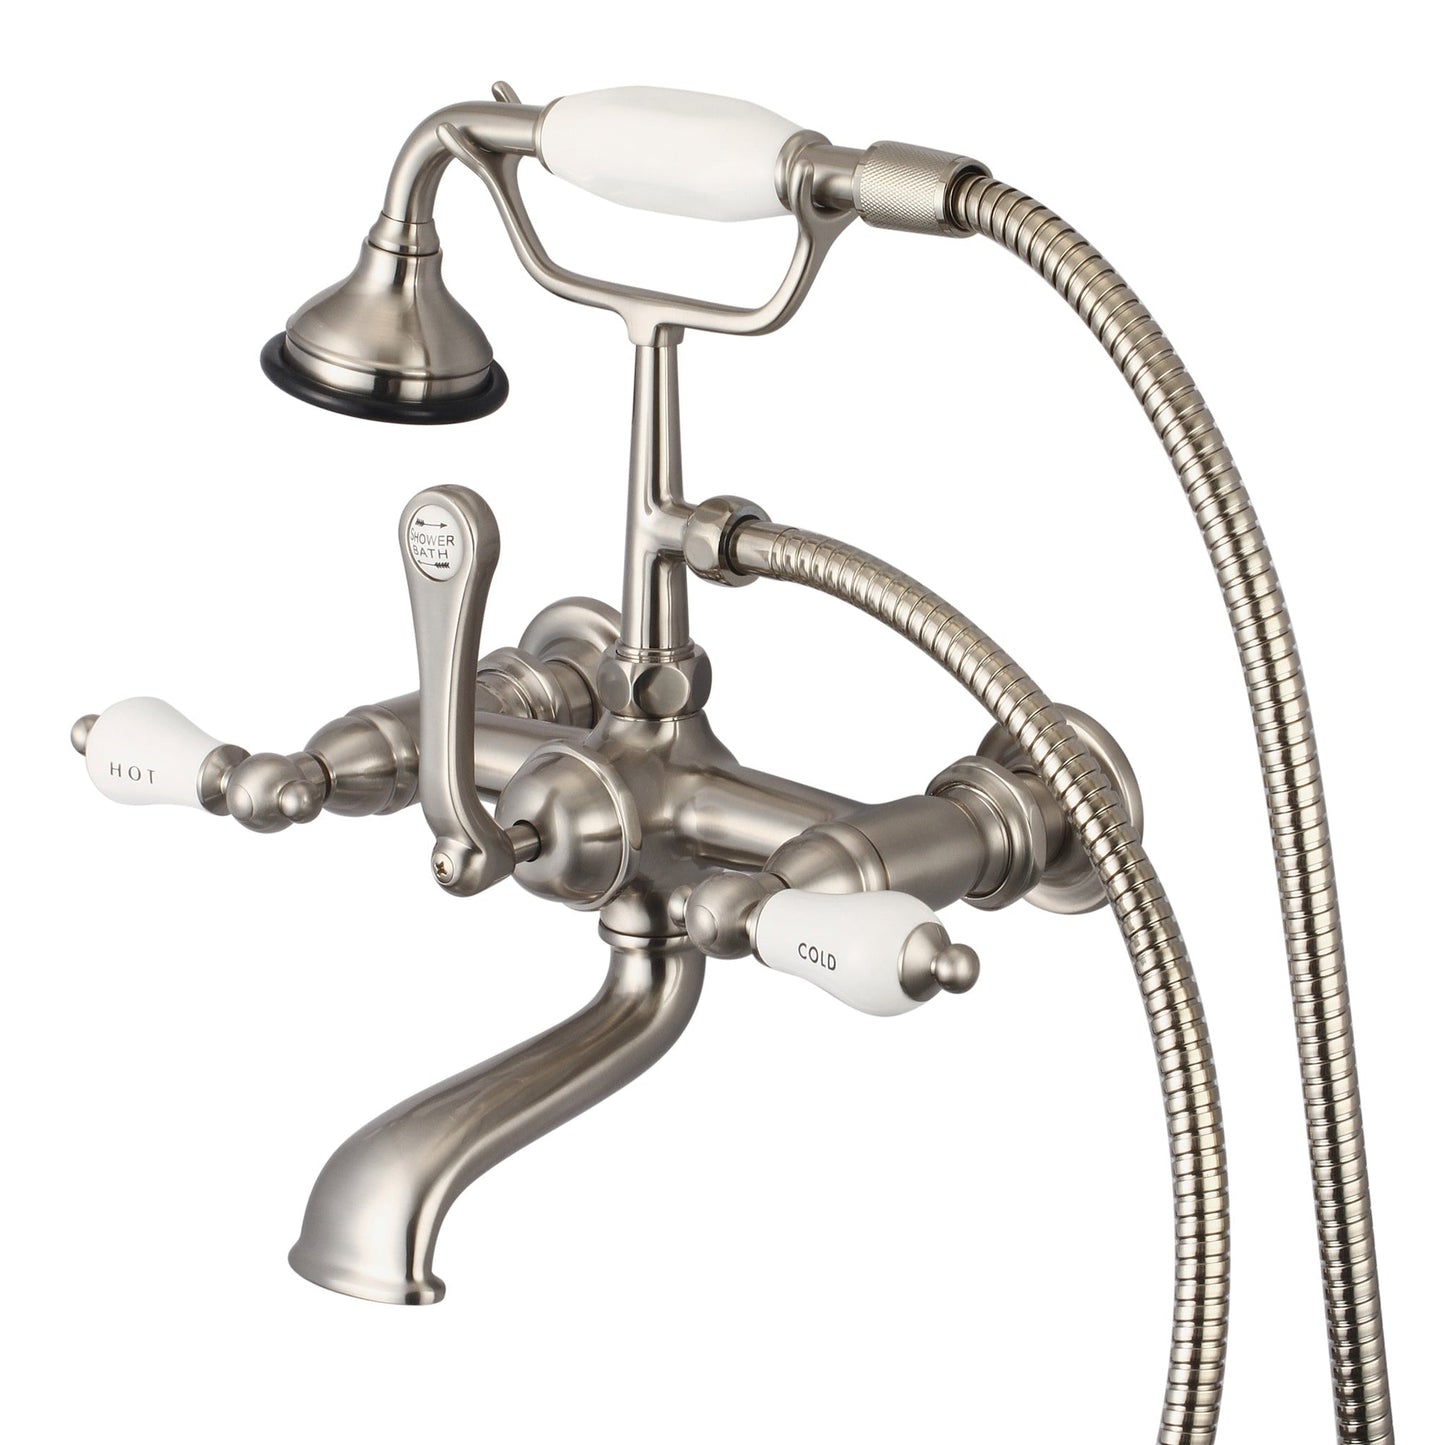 Water Creation Vintage Classic Spread Wall Mount Tub F6-0010 7" Grey Solid Brass Faucet With Straight Wall Connector And Handheld Shower And Porcelain Lever Handles, Hot And Cold Labels Included